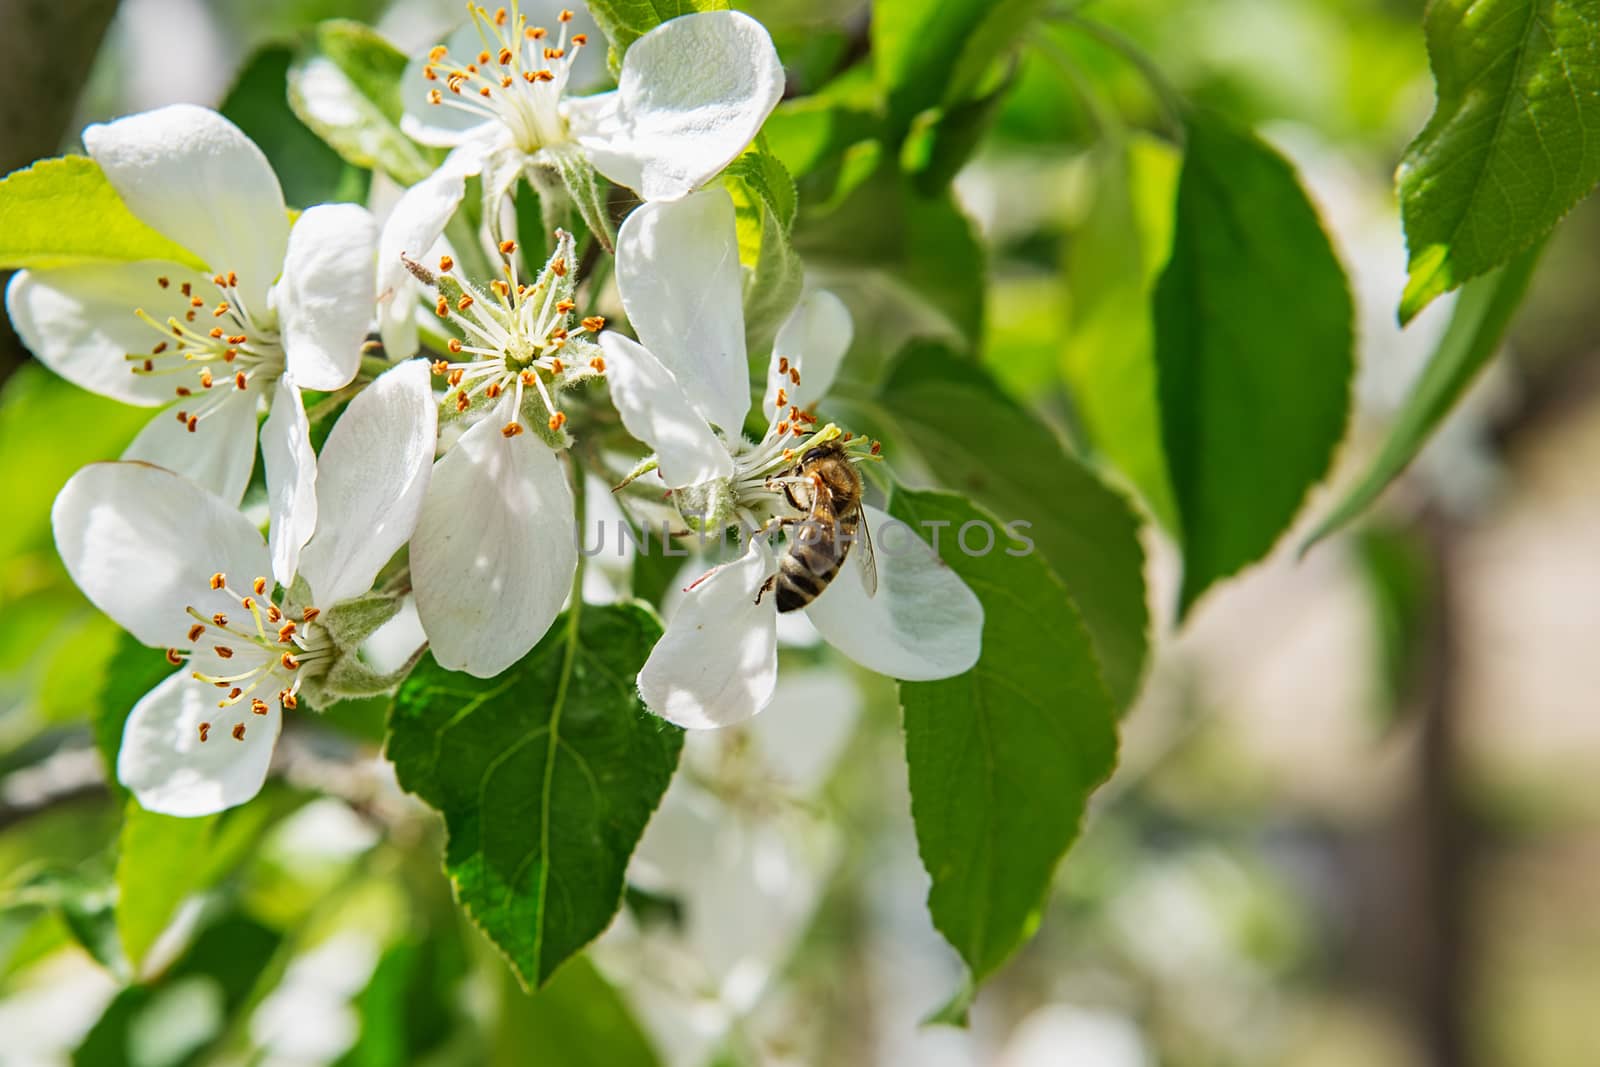 The bee sits on a flower of a bush blossoming apple tree and pollinates him. bees collecting nectar from blooming white apple trees